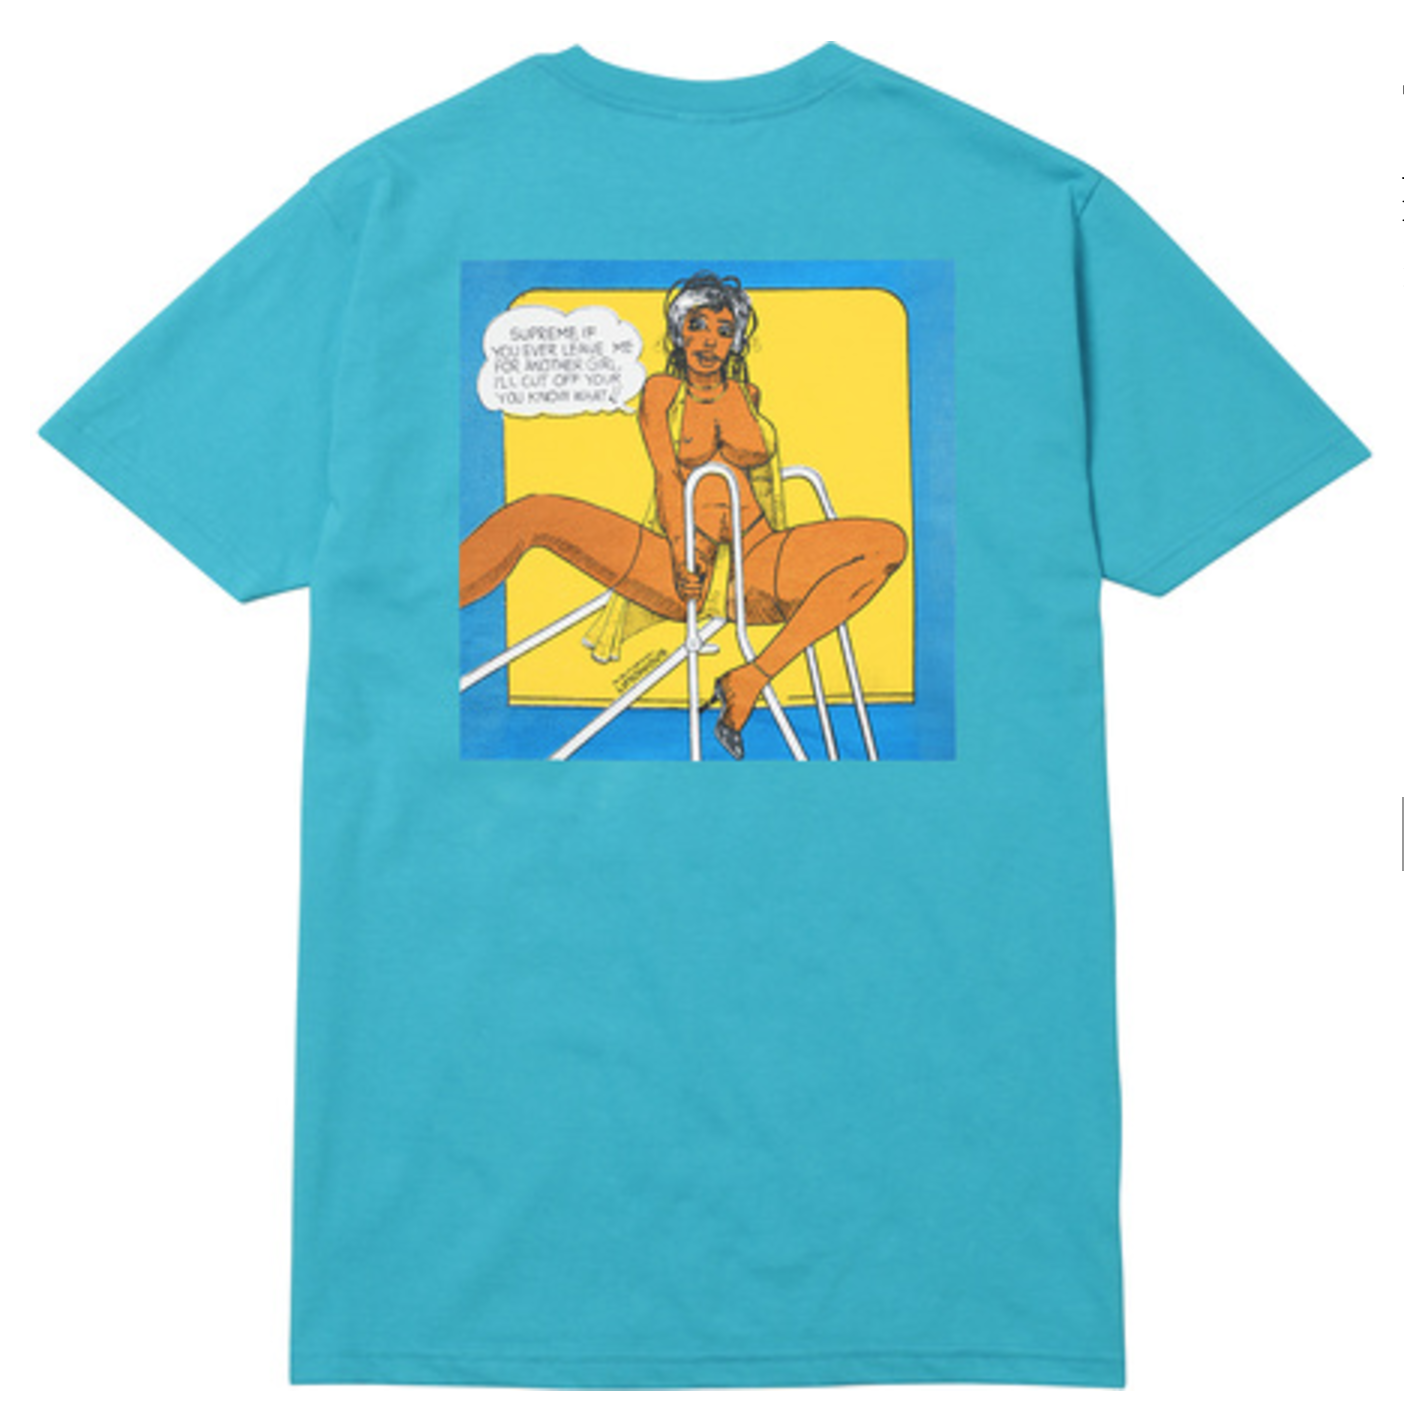 Supreme Onious Undercover lover tee - Teal